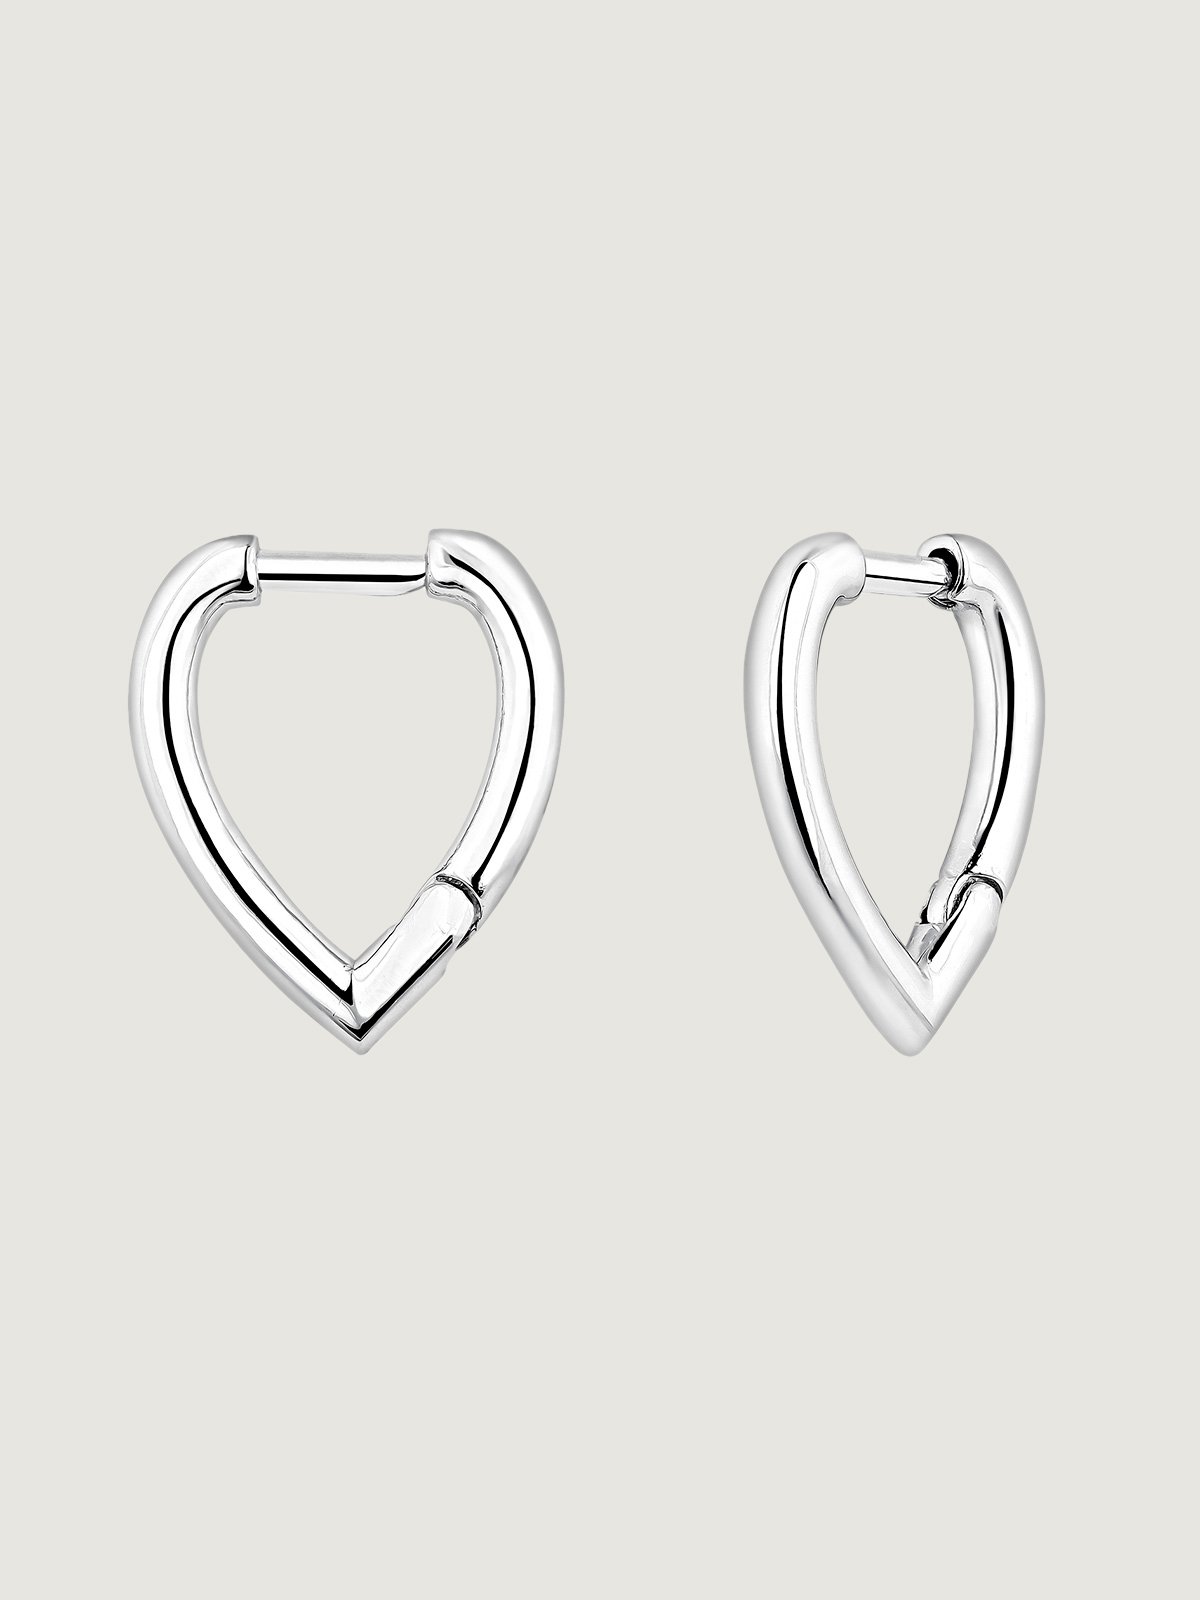 Drop-shaped earrings made of 925 silver